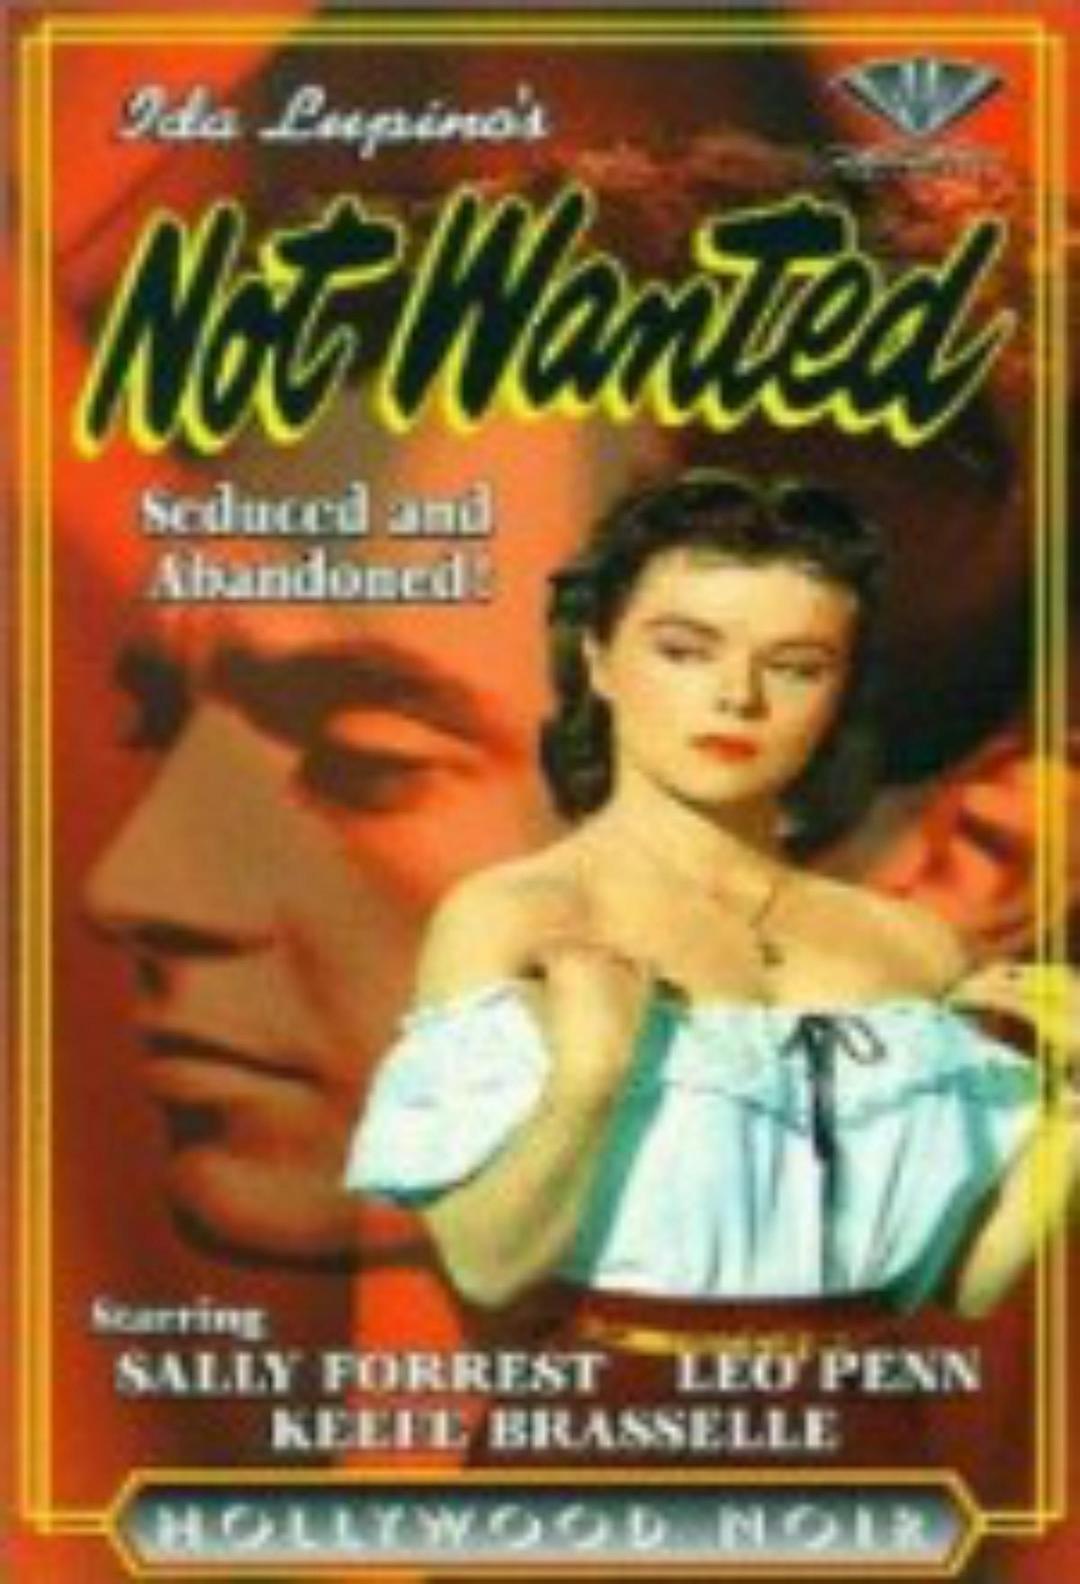 Ҫ Not.Wanted.1949.1080p.BluRay.REMUX.AVC.DTS-HD.MA.2.0-FGT 18.26GB-1.png